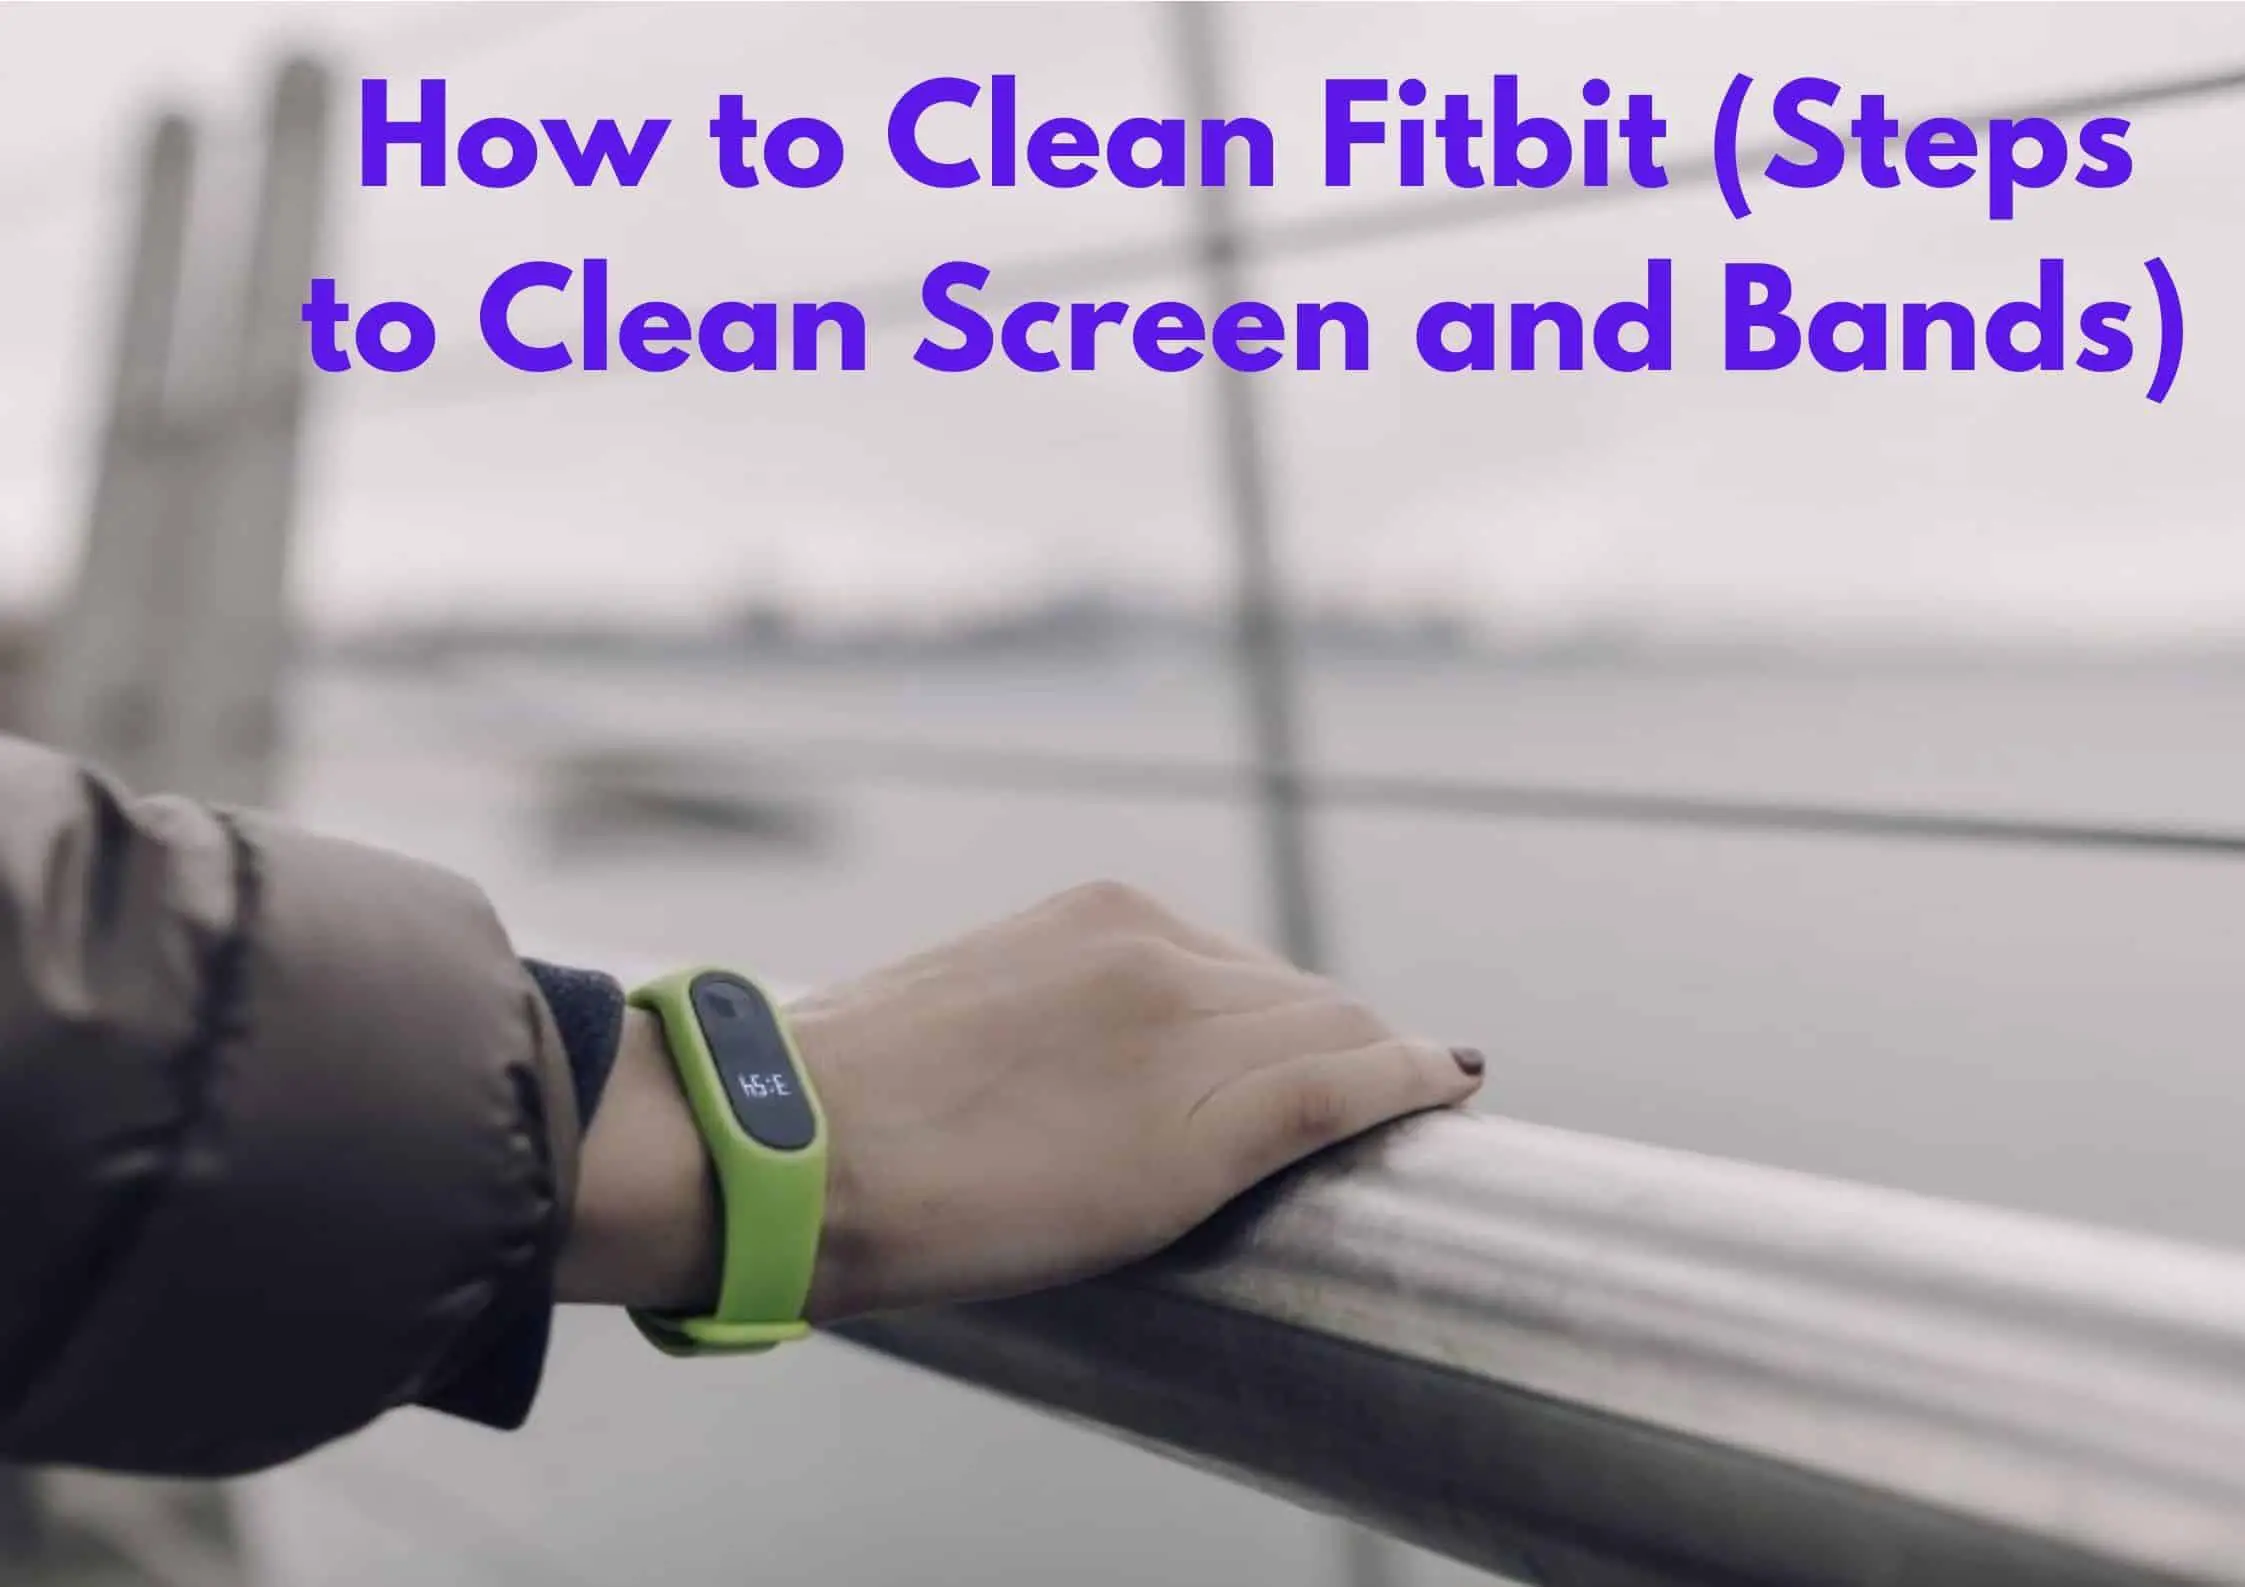 How to Clean Fitbit (Steps to Clean Screen and Bands)